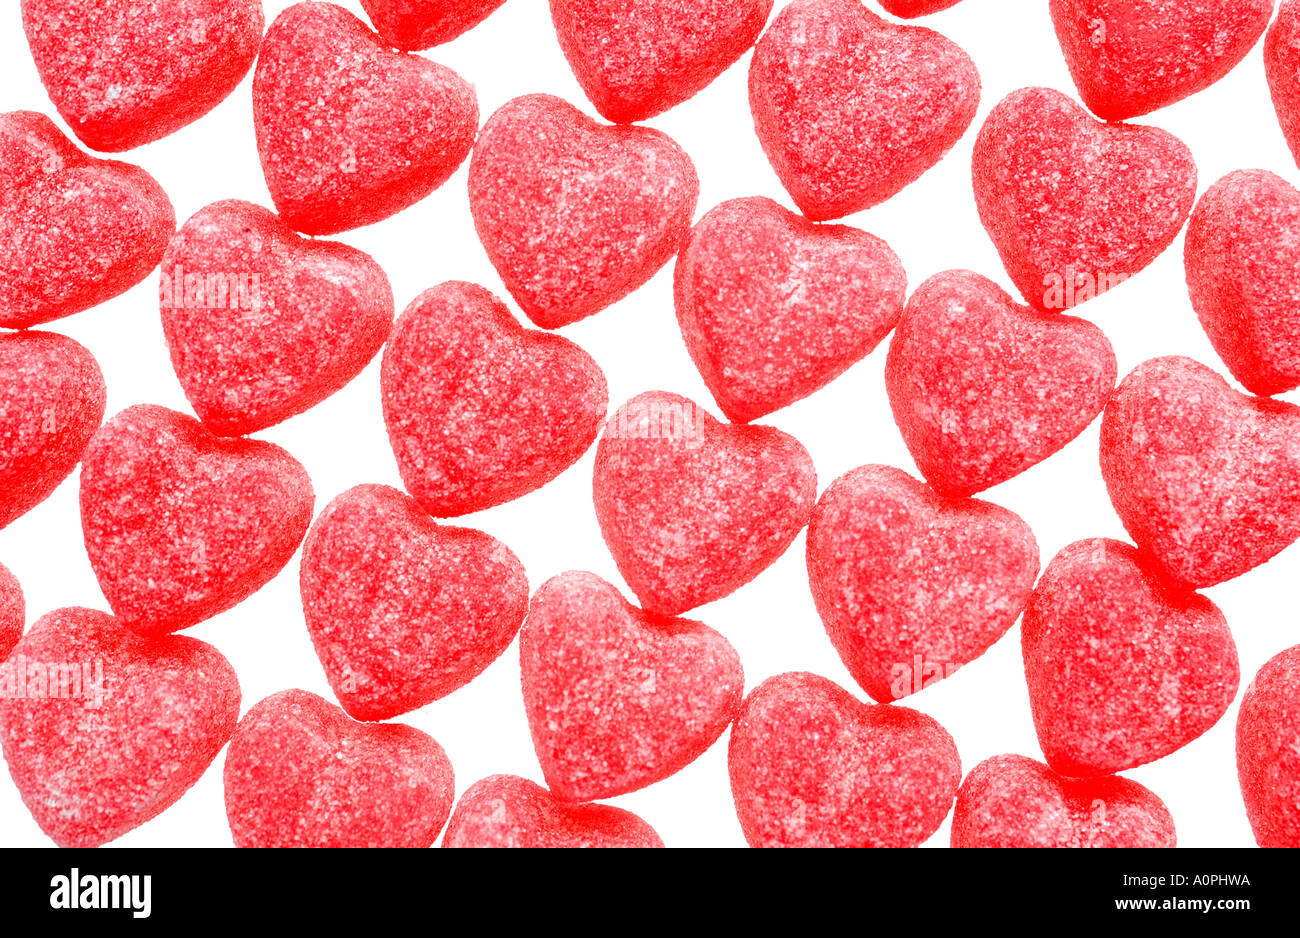 Candy Hearts in Rows Stock Photo